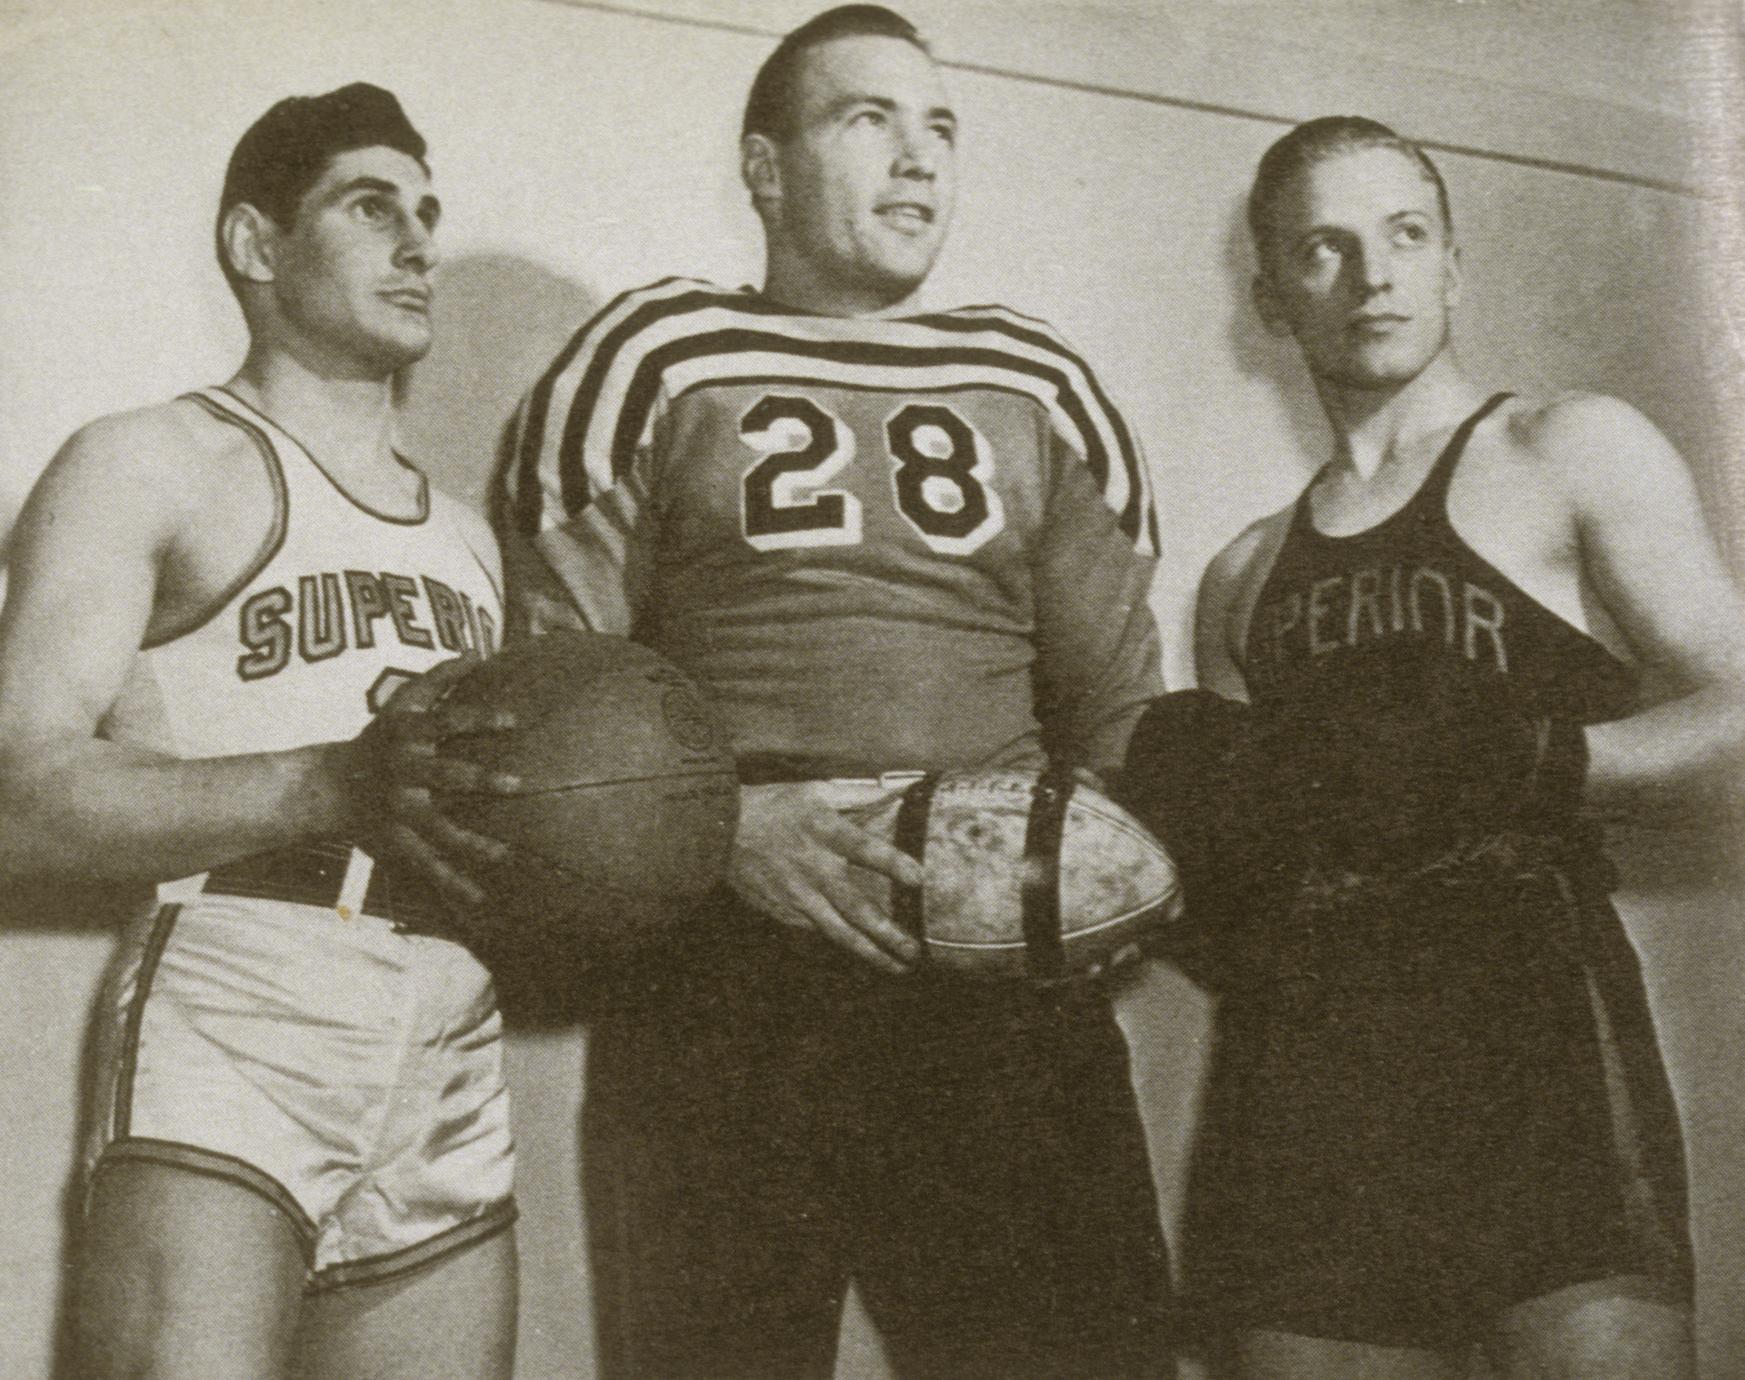 Team captains, early 1940s